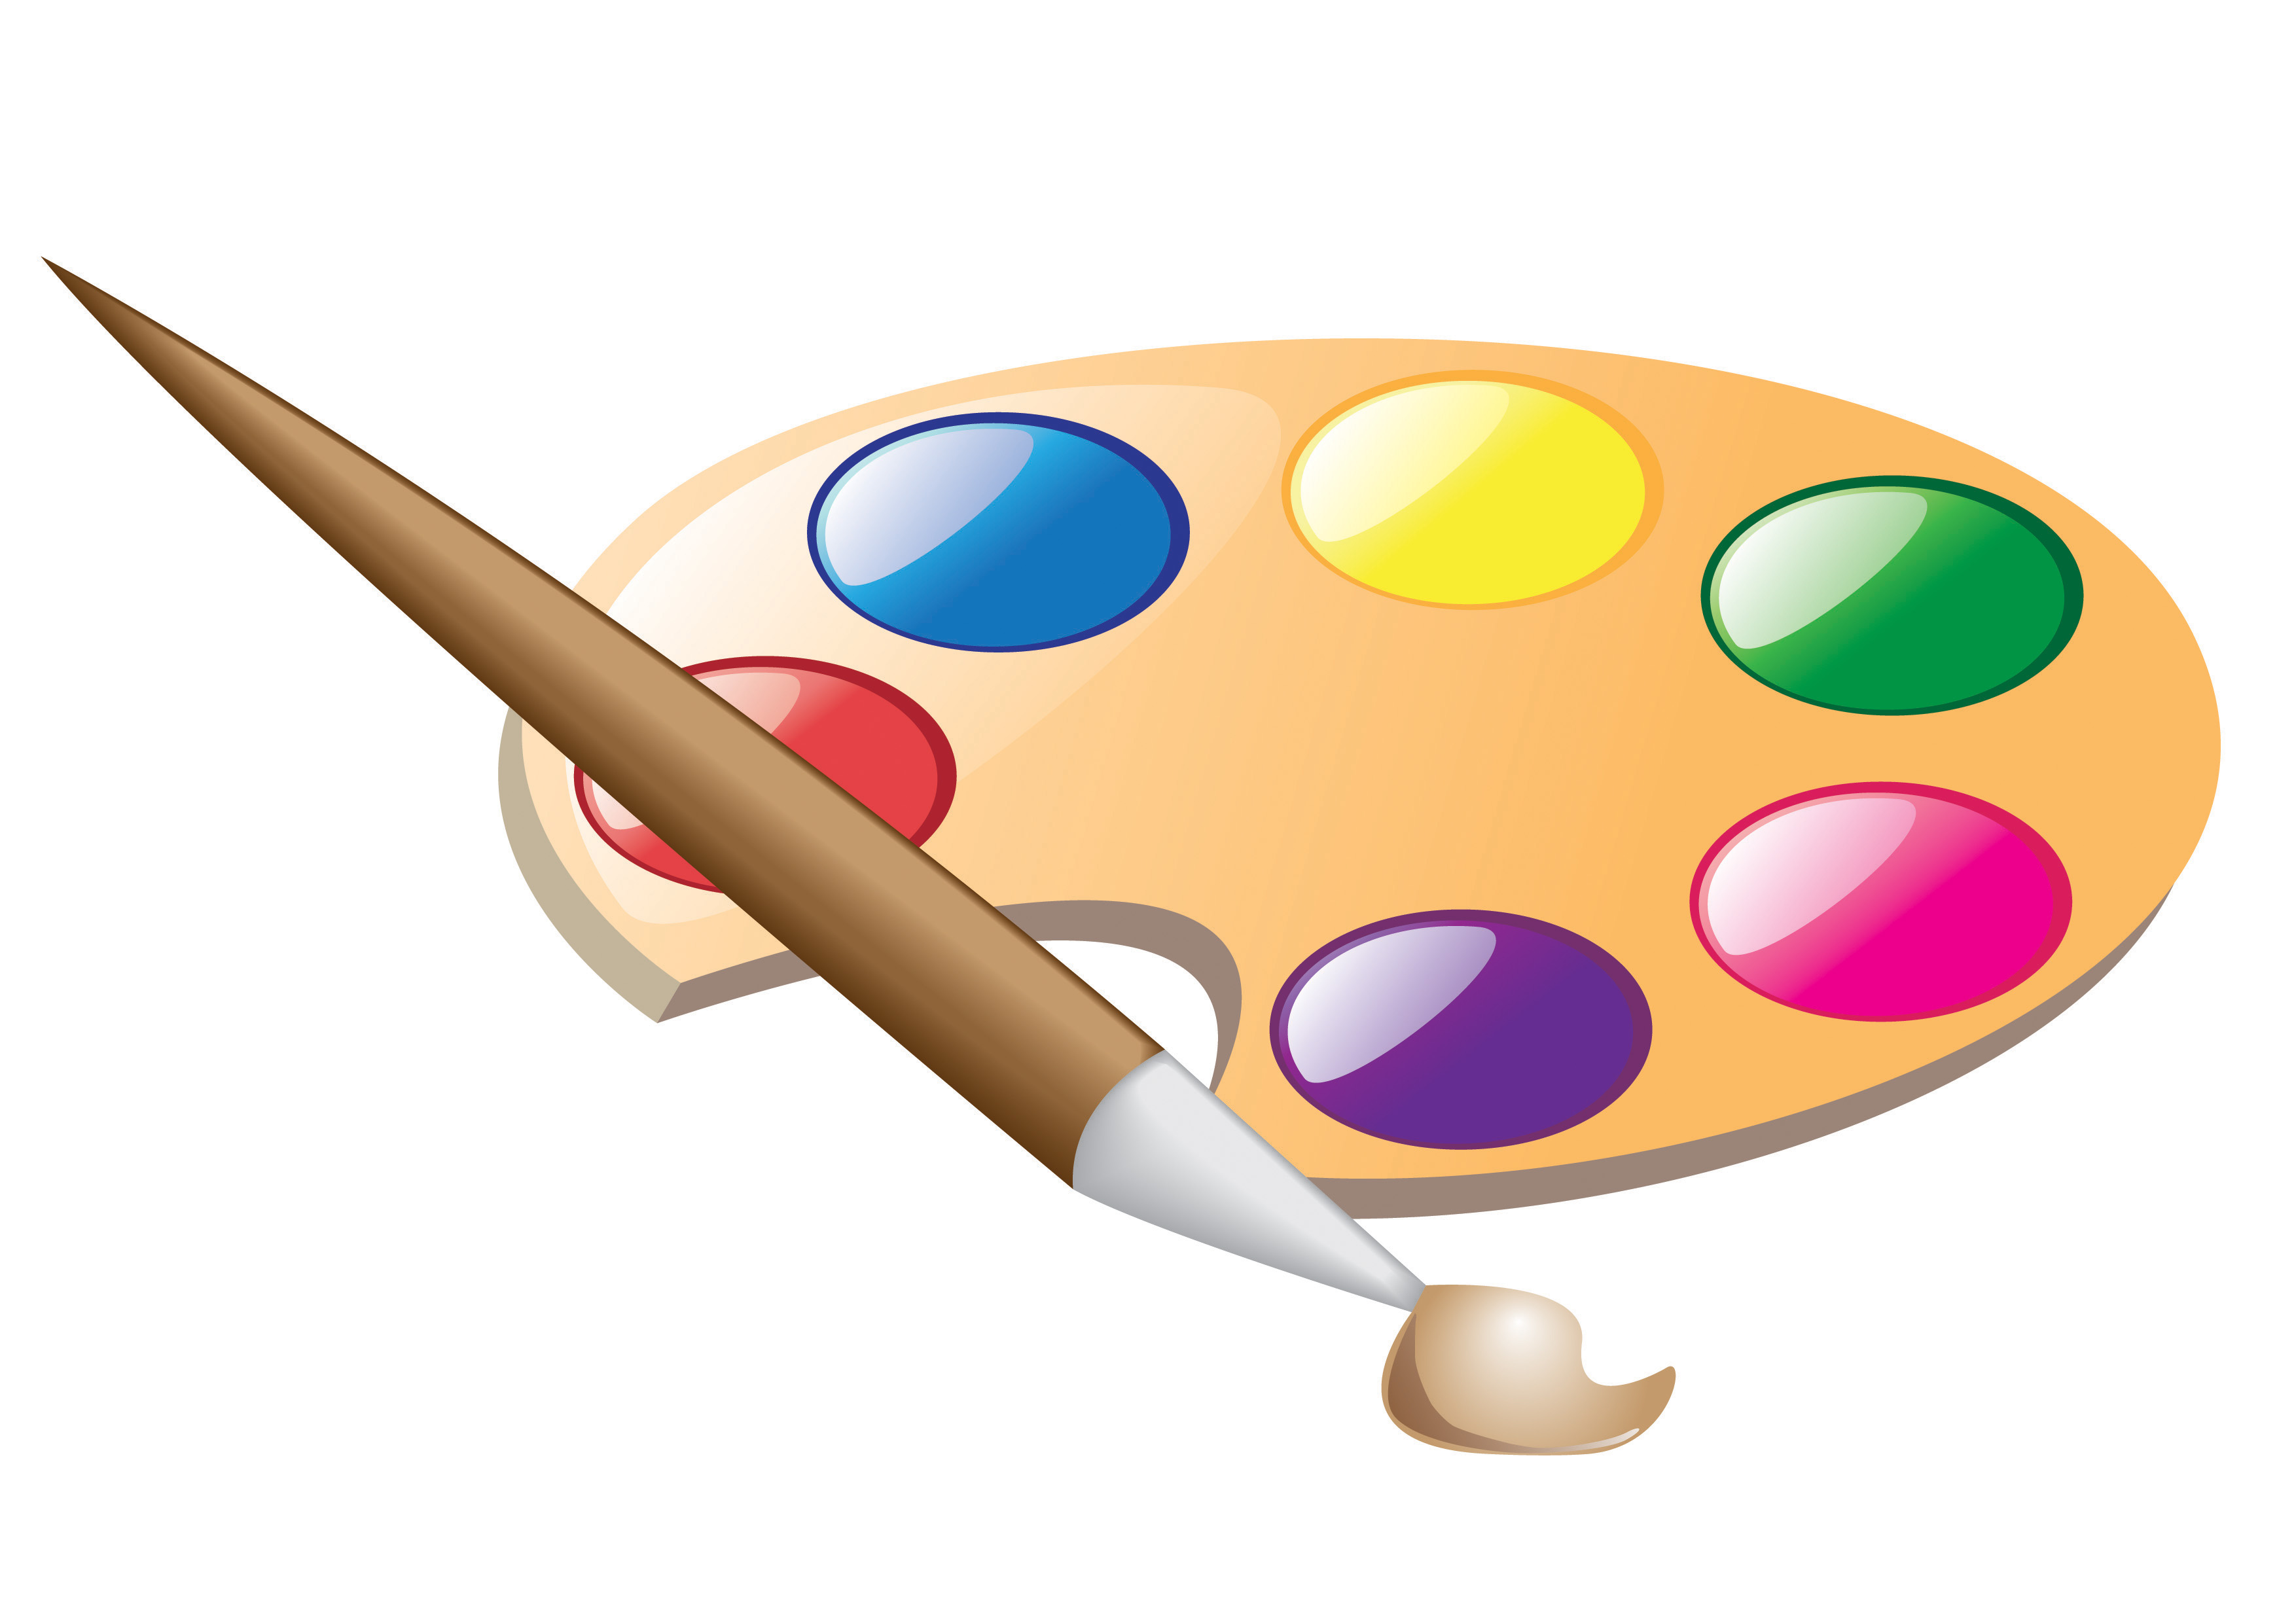 palette and brush for drawing - Download Free Vectors ...